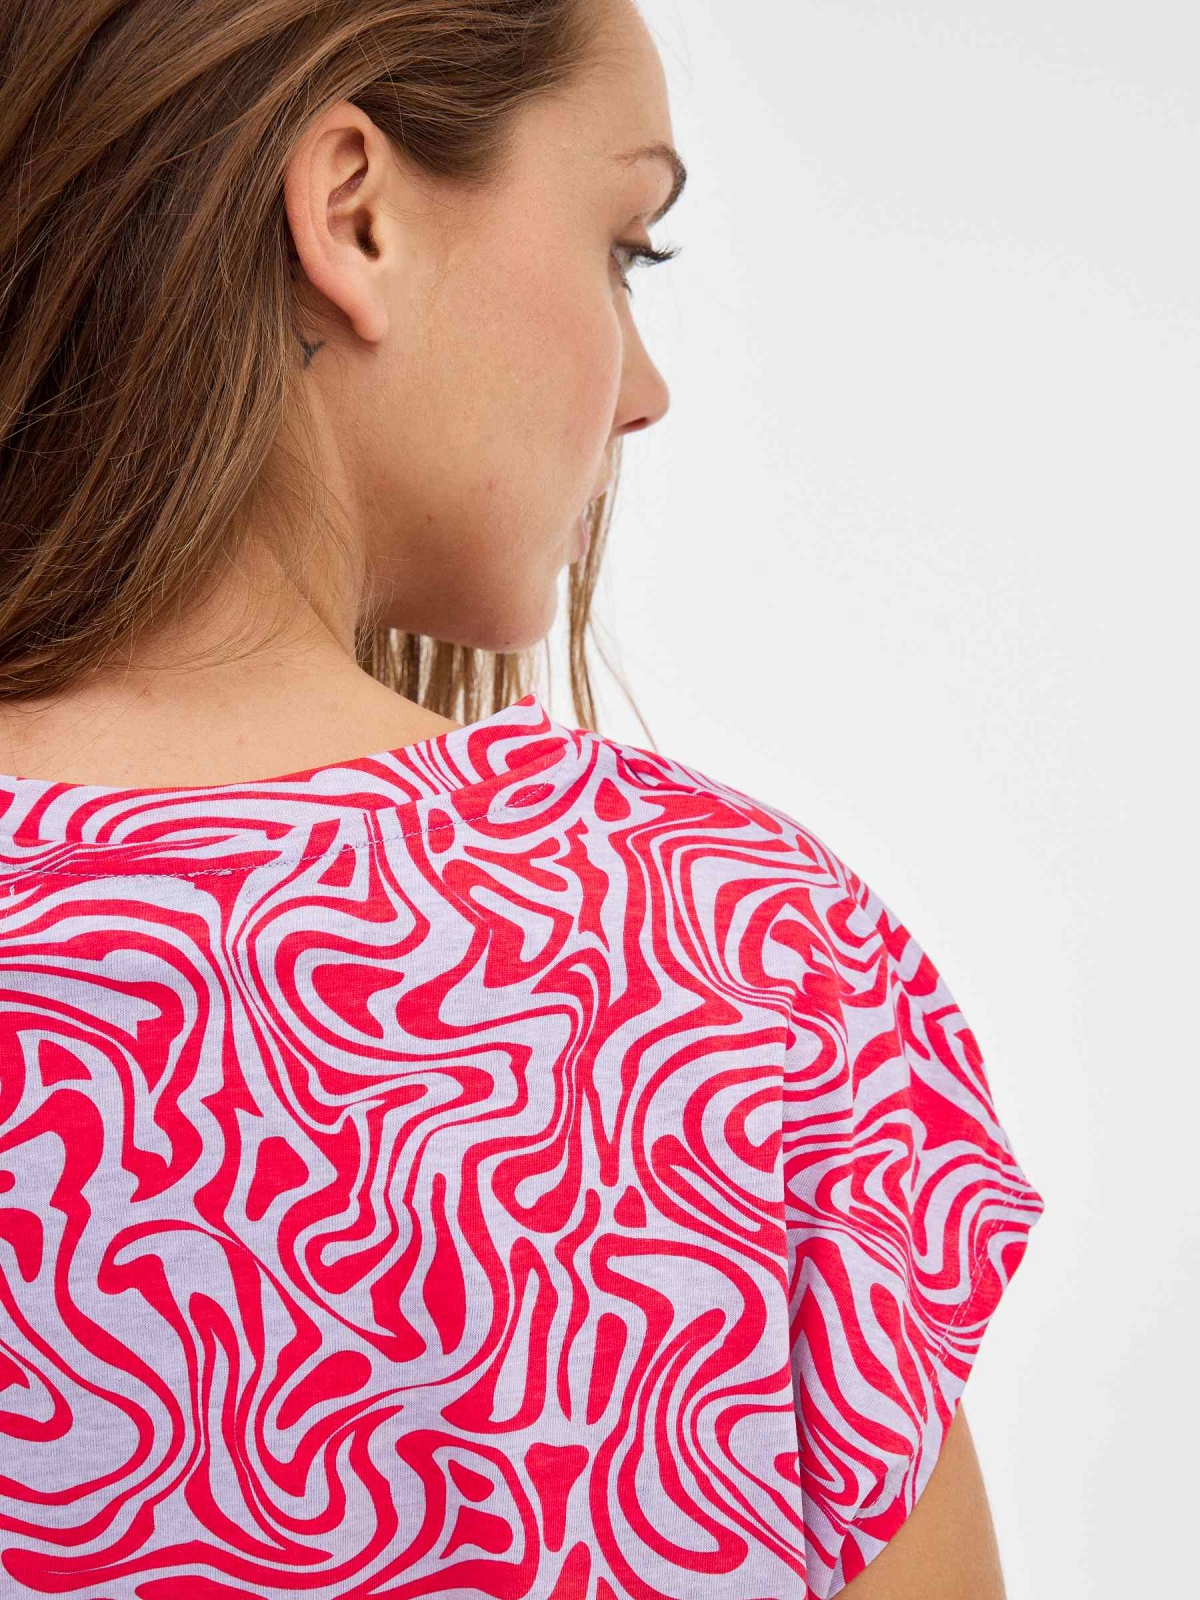 Psychedelic print t-shirt with knot mauve detail view